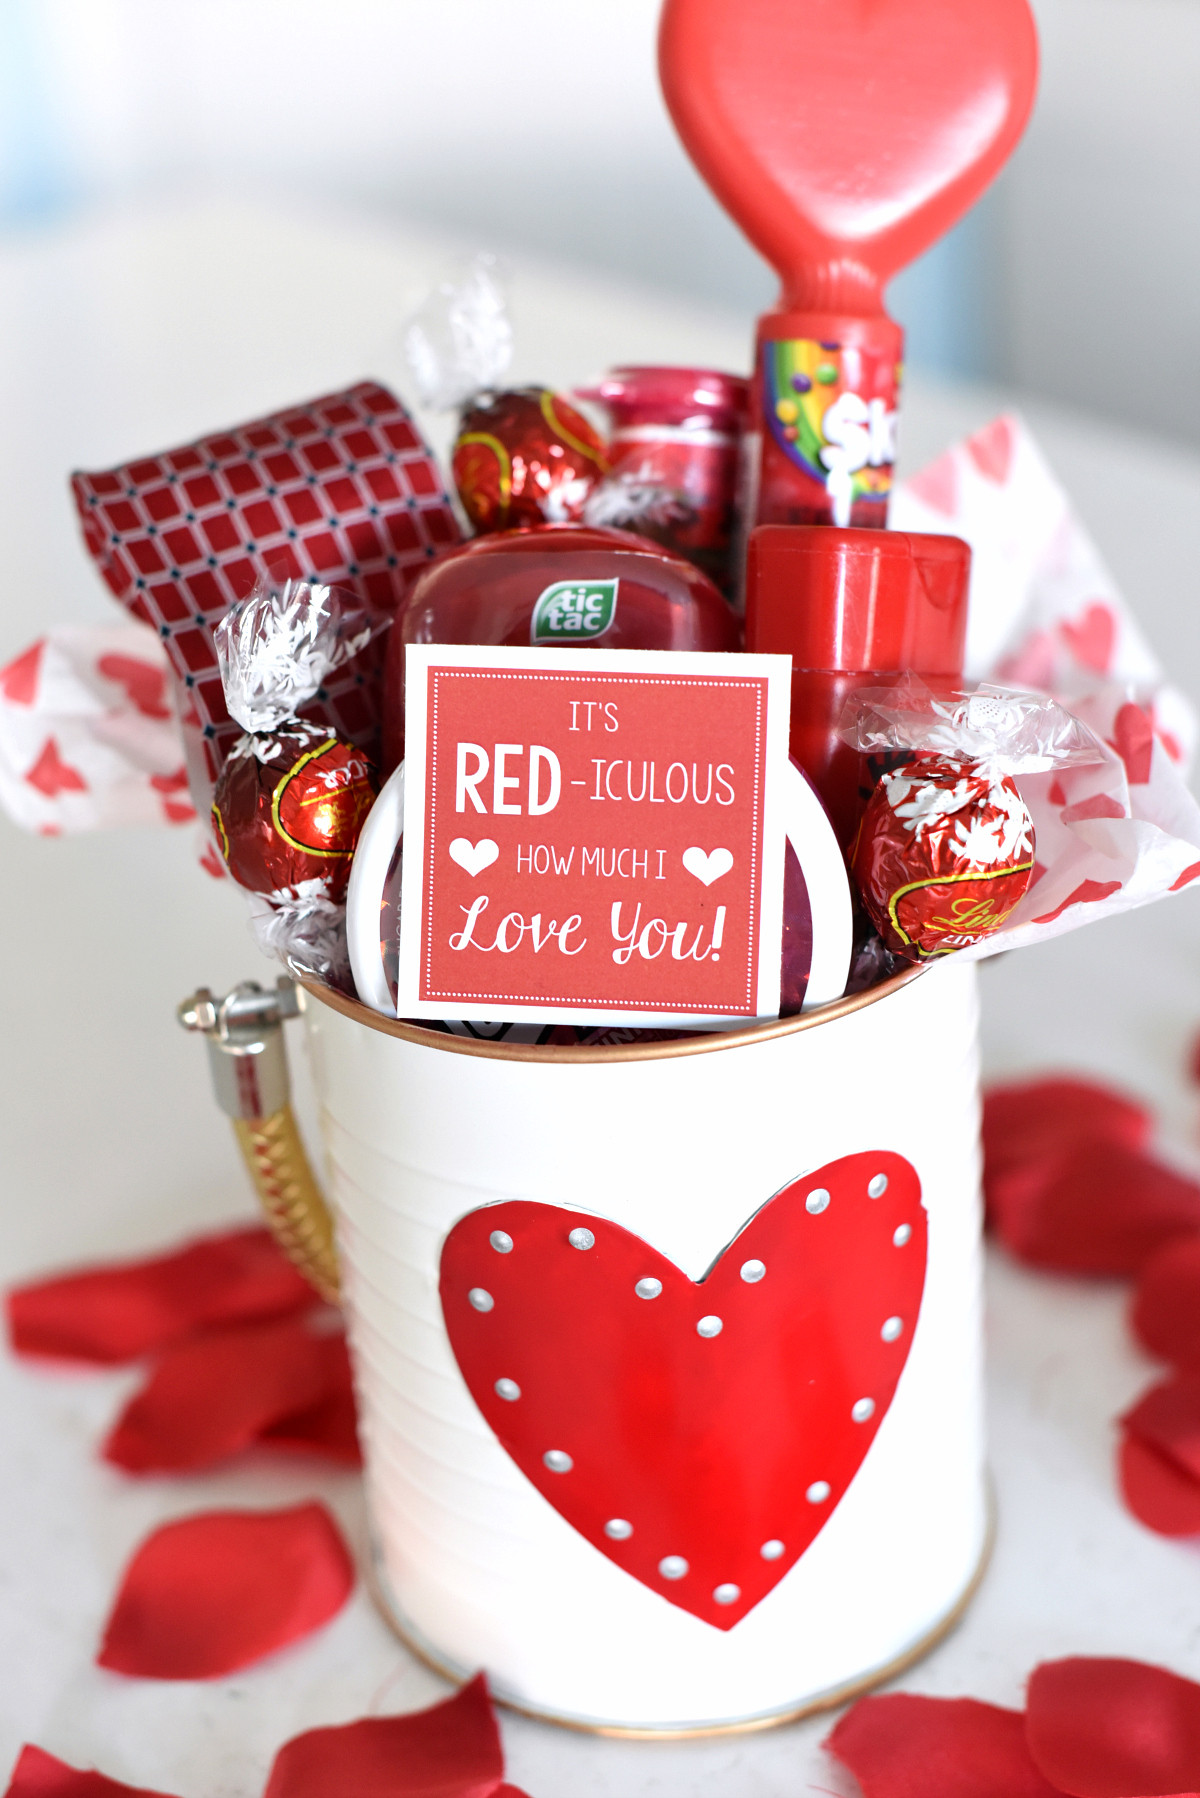 Good Valentines Day Gift Ideas For Her
 Fun Ways to Make Valentine s Day Special for Your Spouse